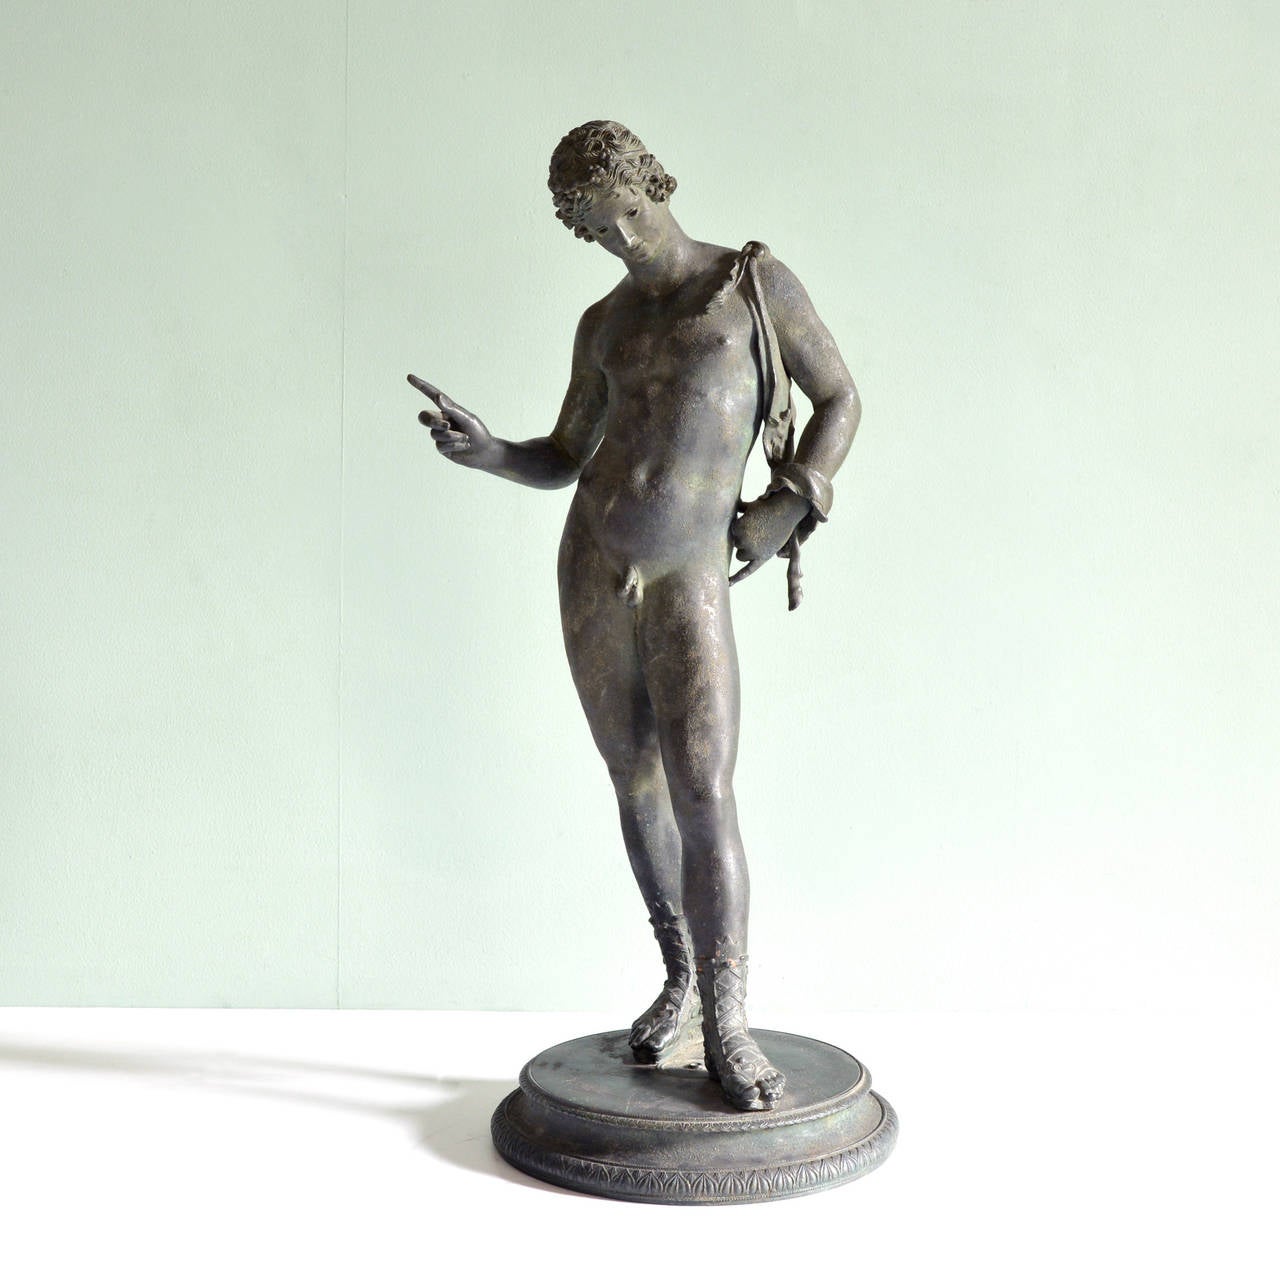 An Italian bronze of Dionysus, second half of the 19th Century, by Sommer of Naples.

Available to view at Brunswick House, London.

Height 61cm, diameter 20.5cm